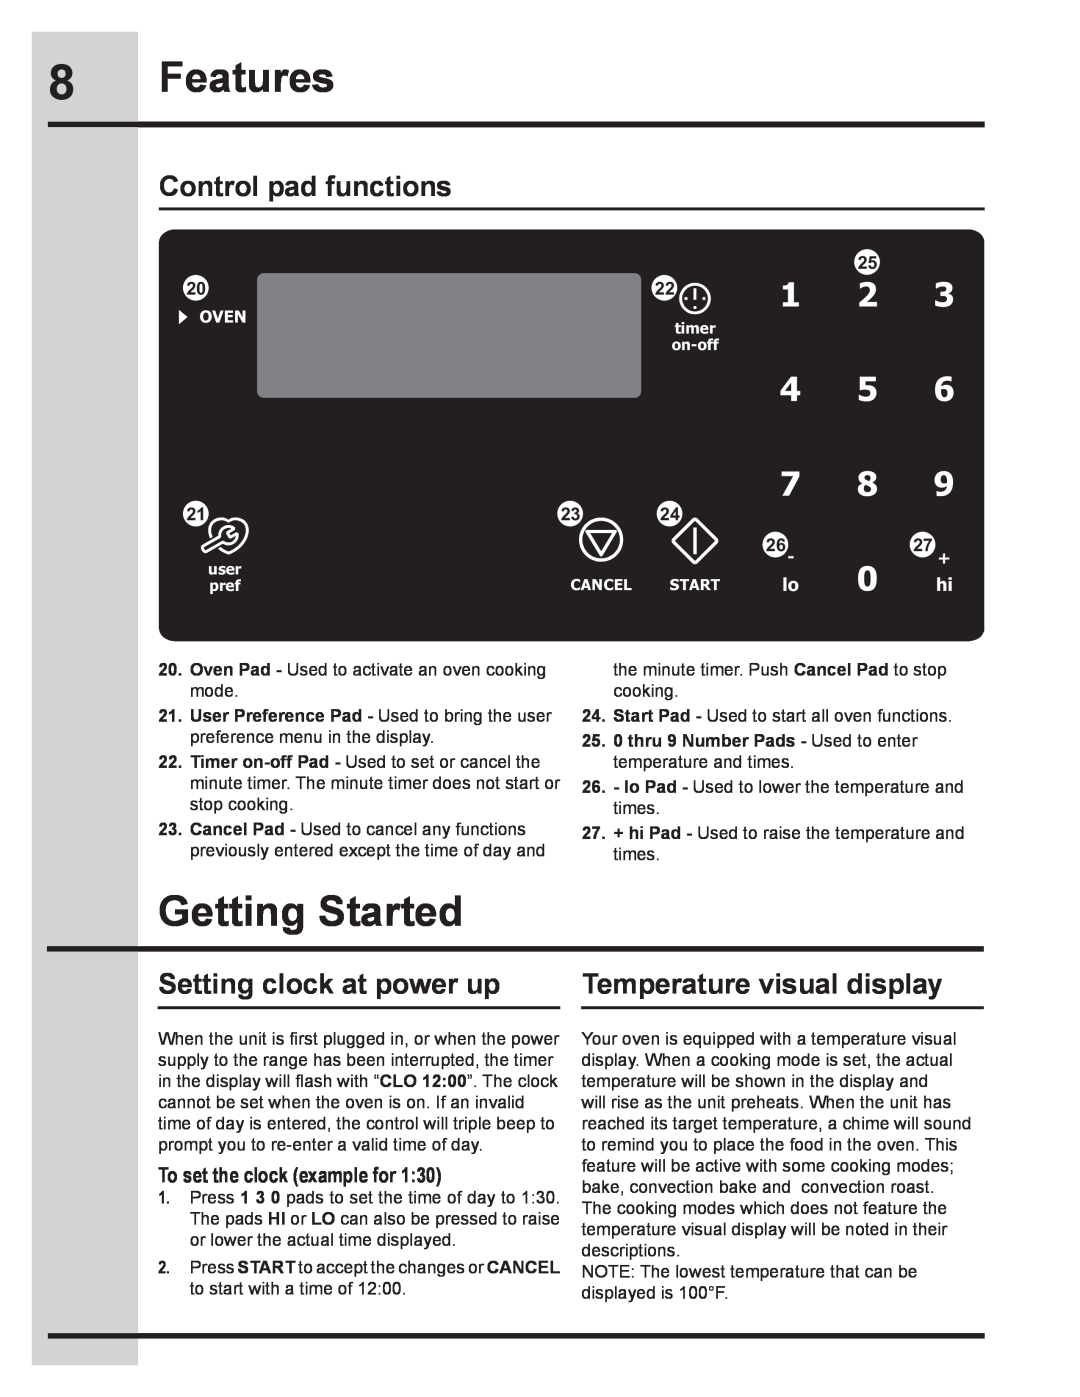 Electrolux 318205134 manual Features, Getting Started, Setting clock at power up, Temperature visual display, 27 +, Oven 